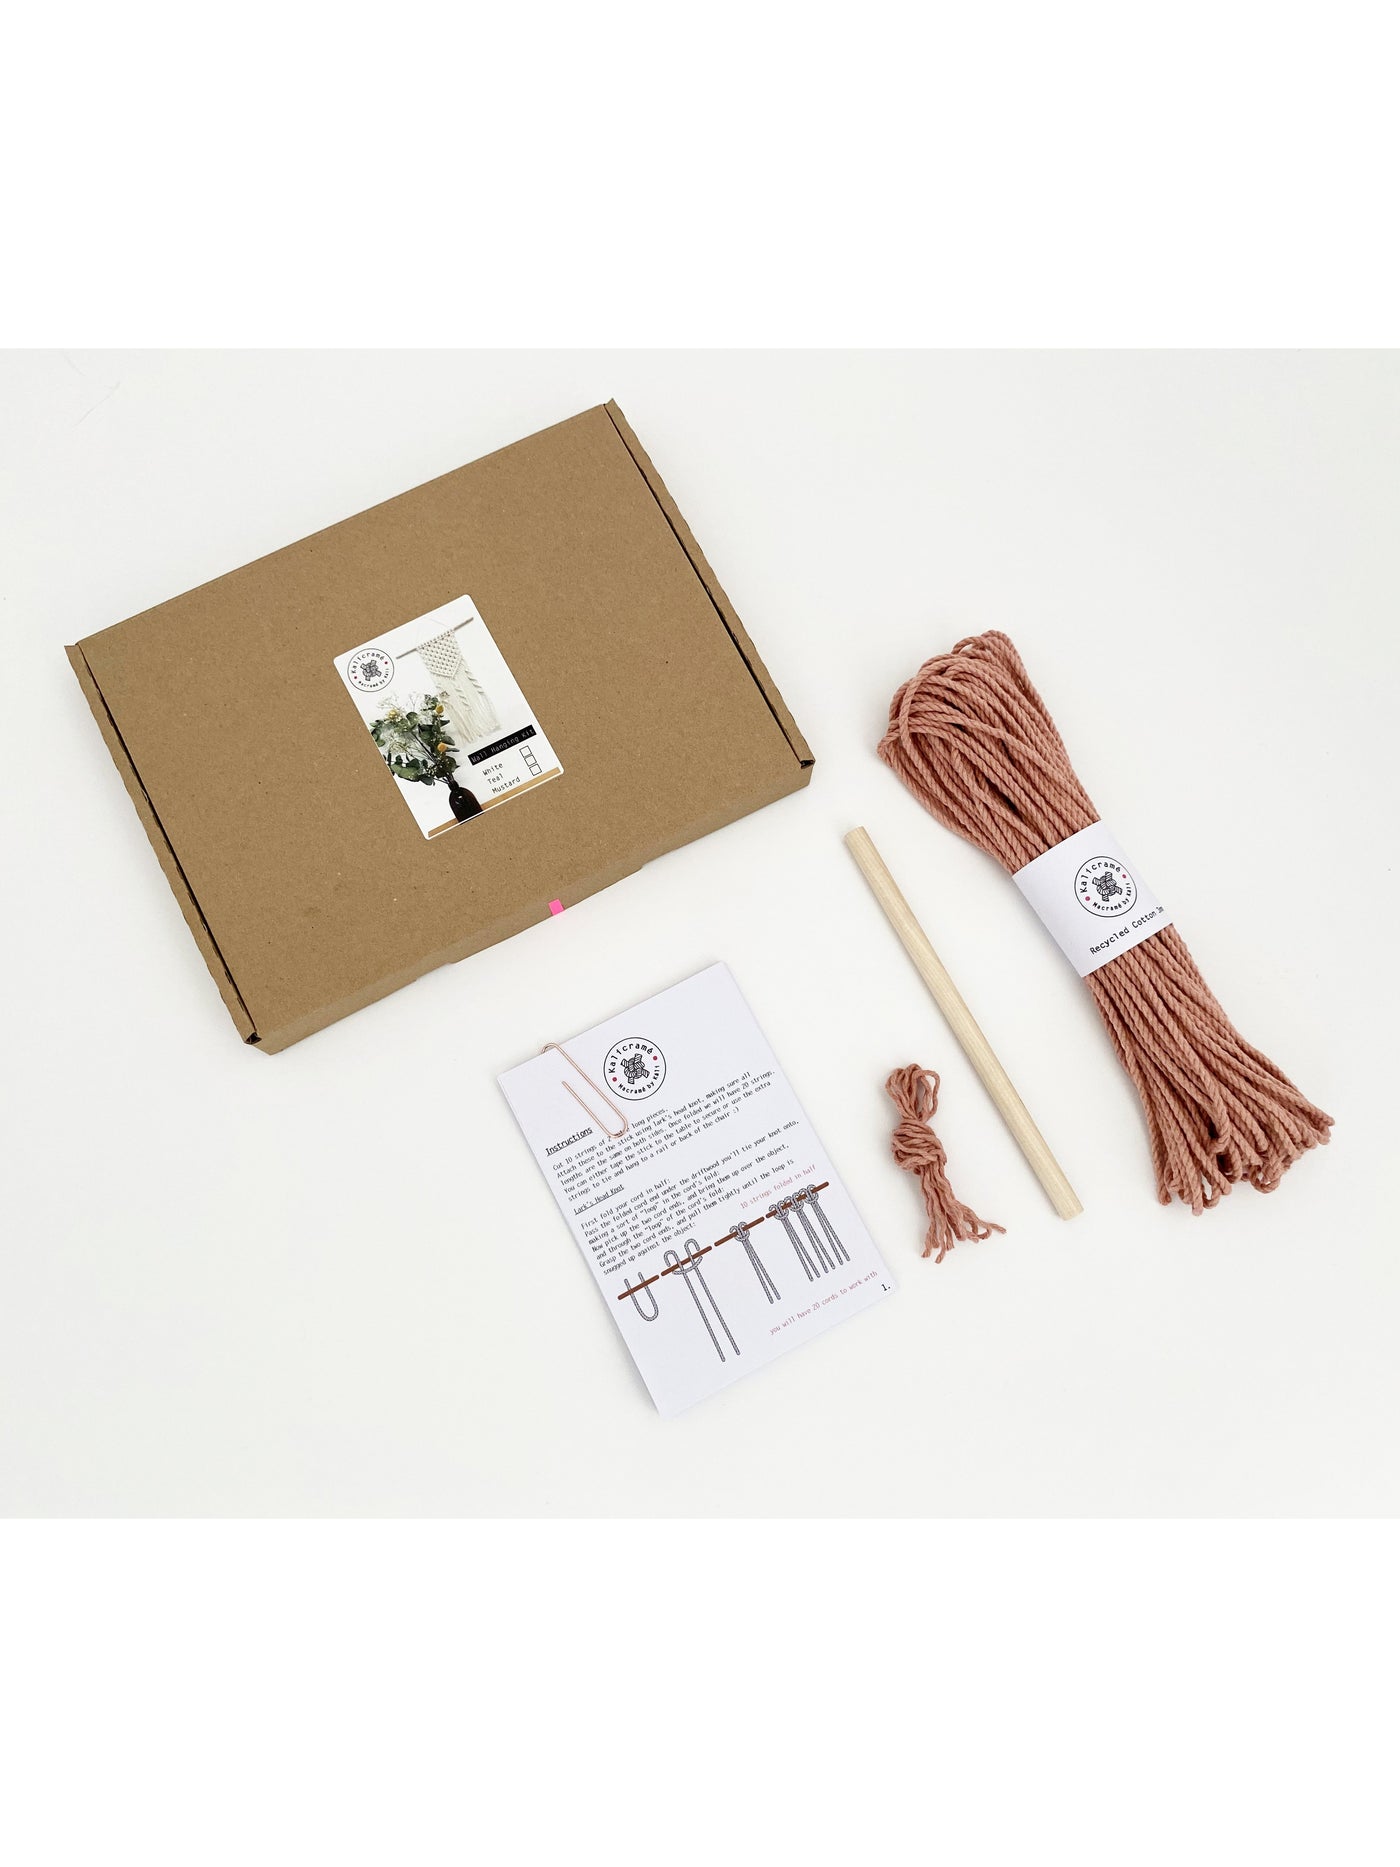 D.I.Y. Macrame Wall Hanging Kit with Video